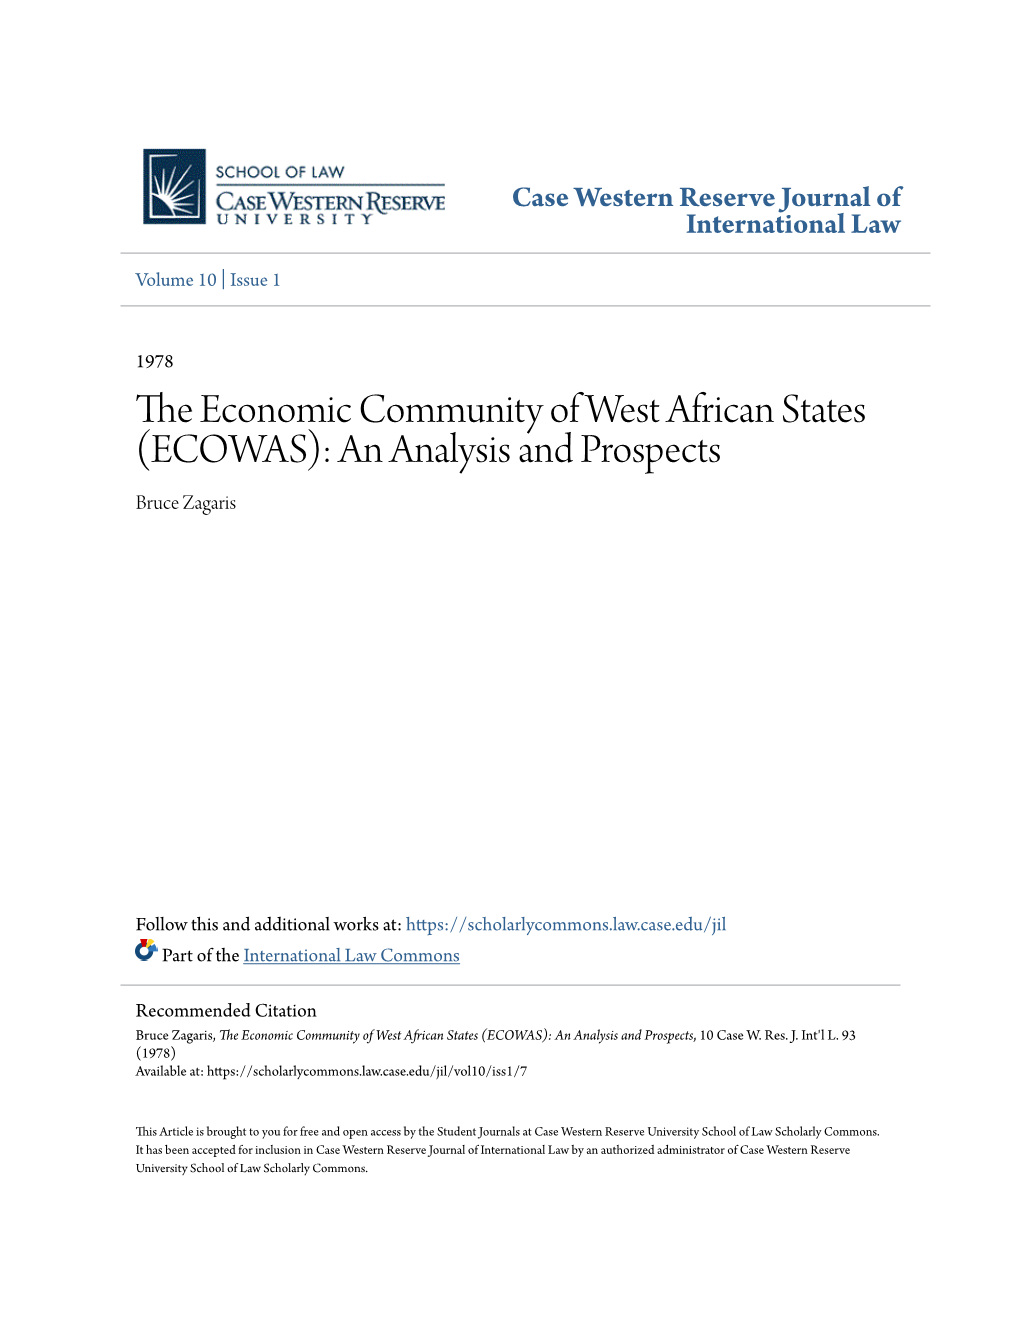 The Economic Community of West African States (ECOWAS): an Analysis and Prospects, 10 Case W